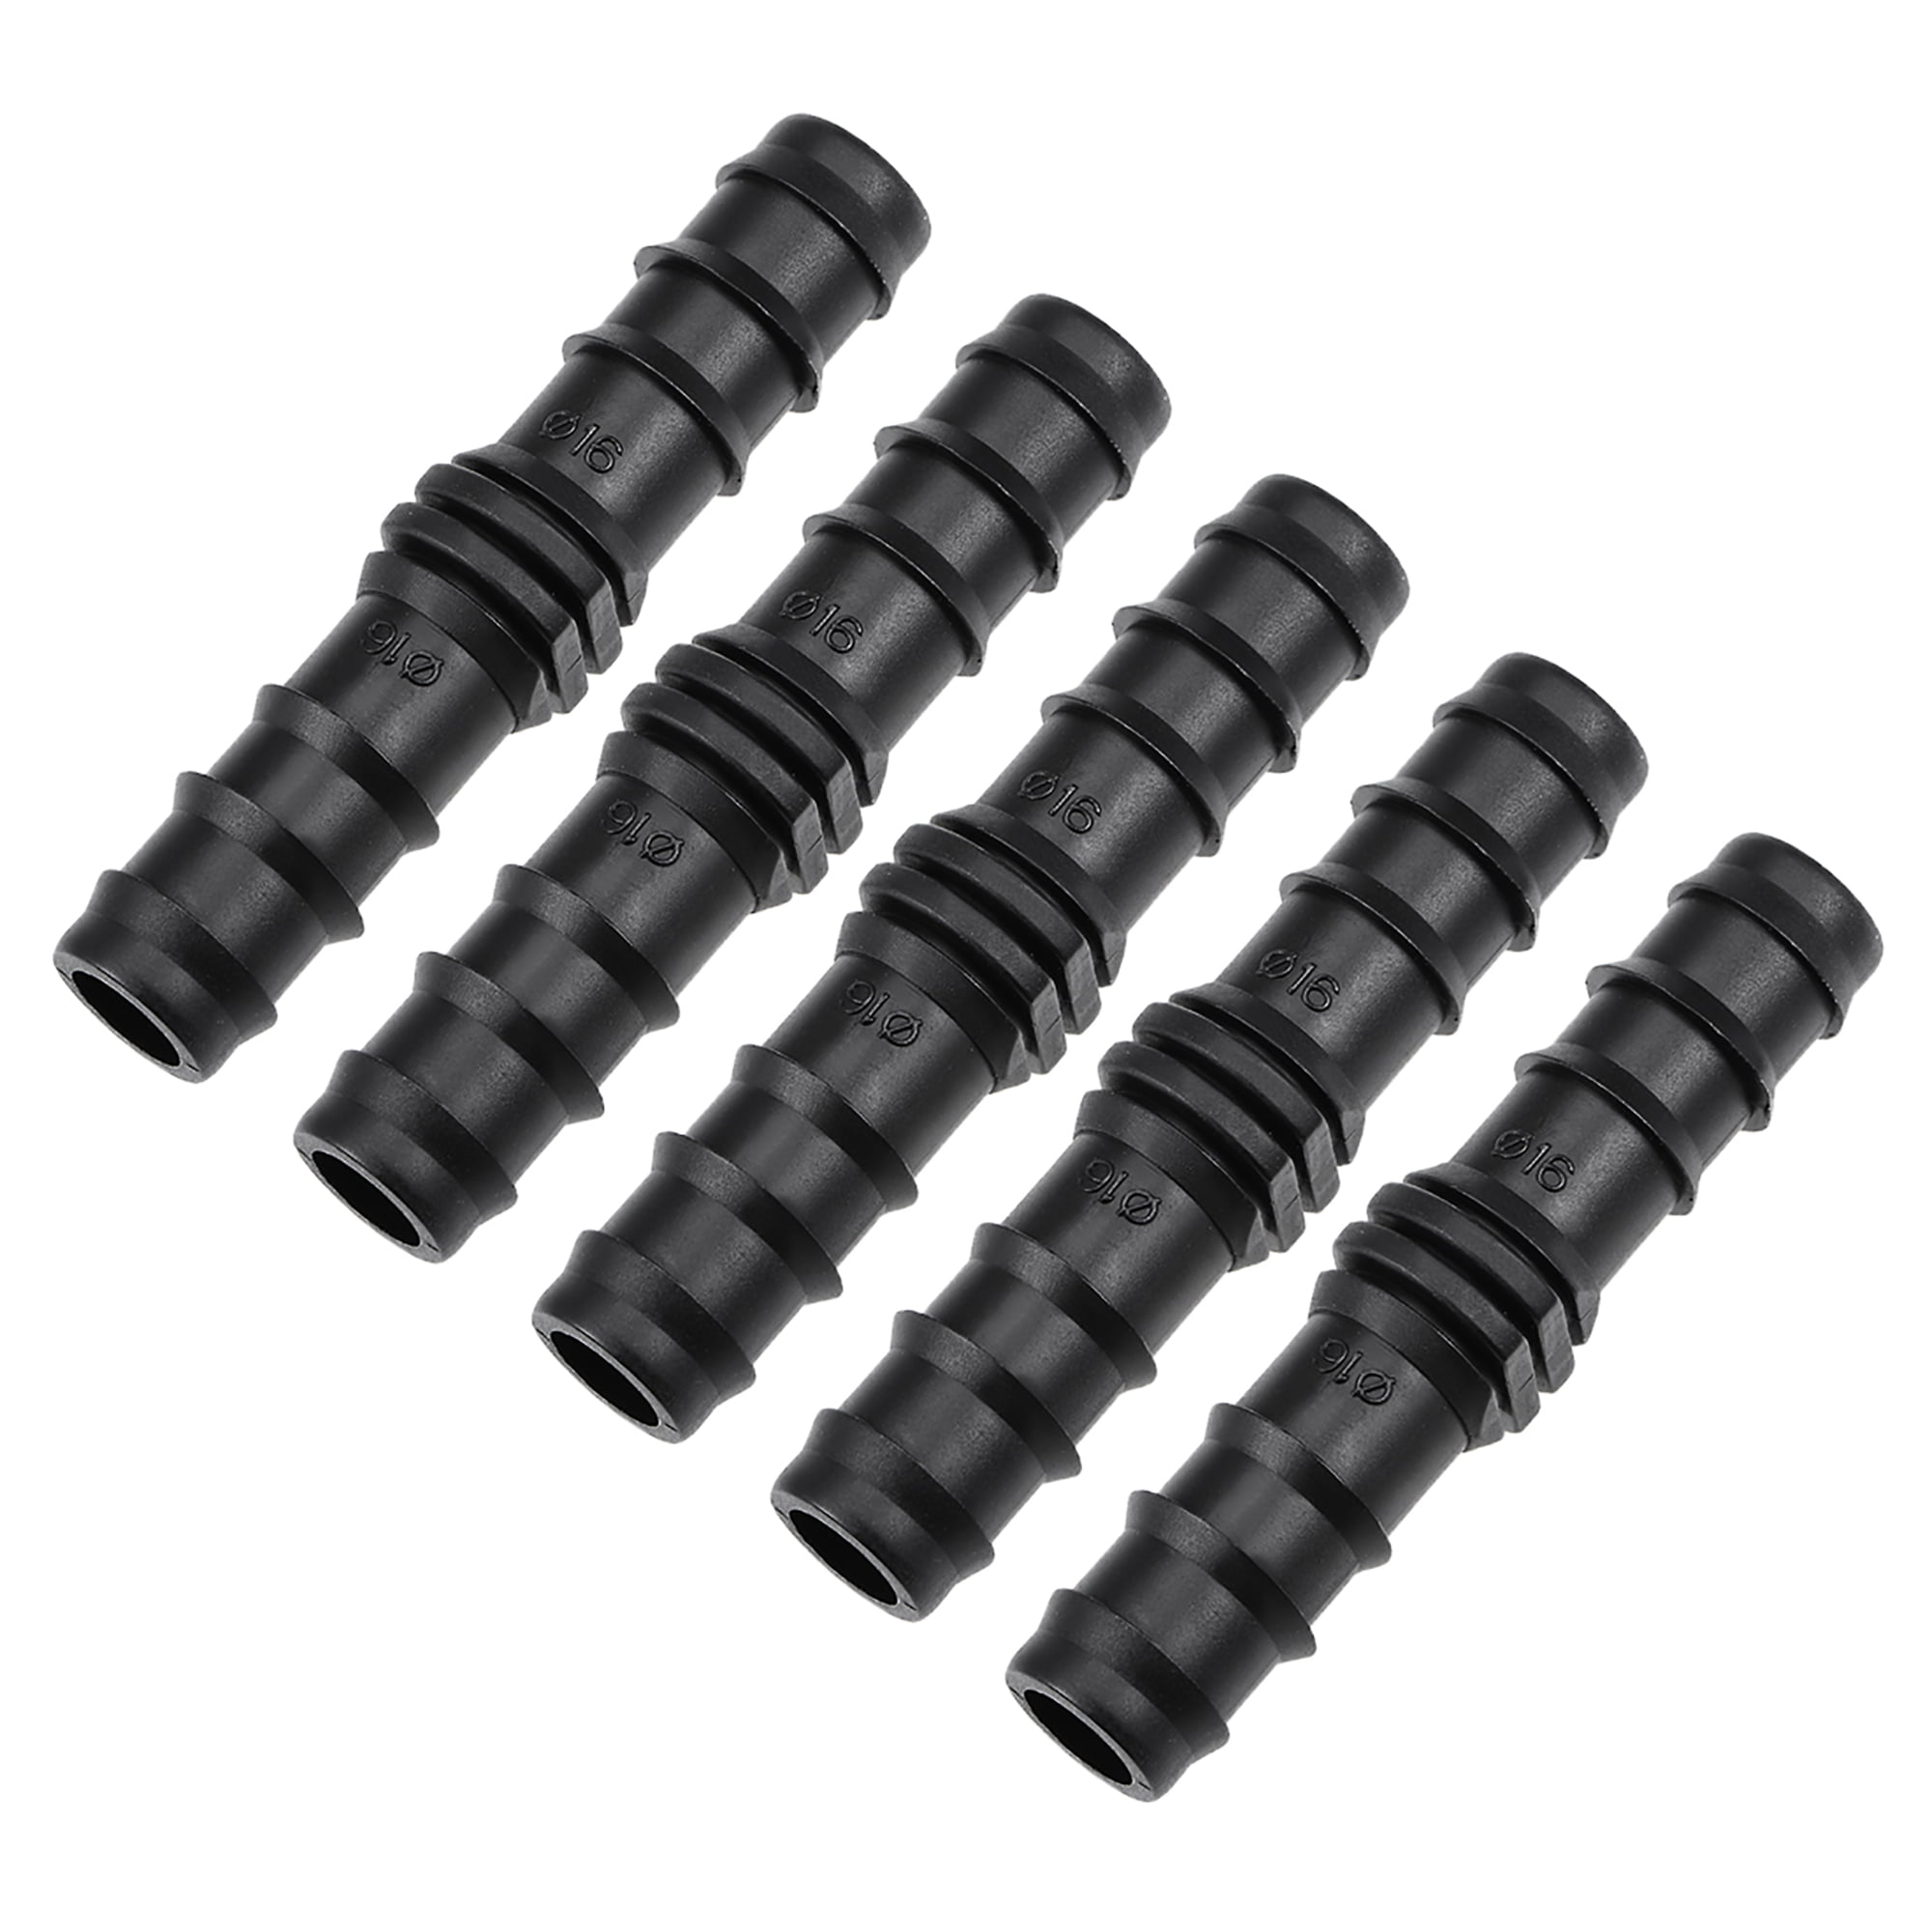 Barb Drip Tee Pipe Connector 20PE Hose Fitting Irrigation System 10pcs 